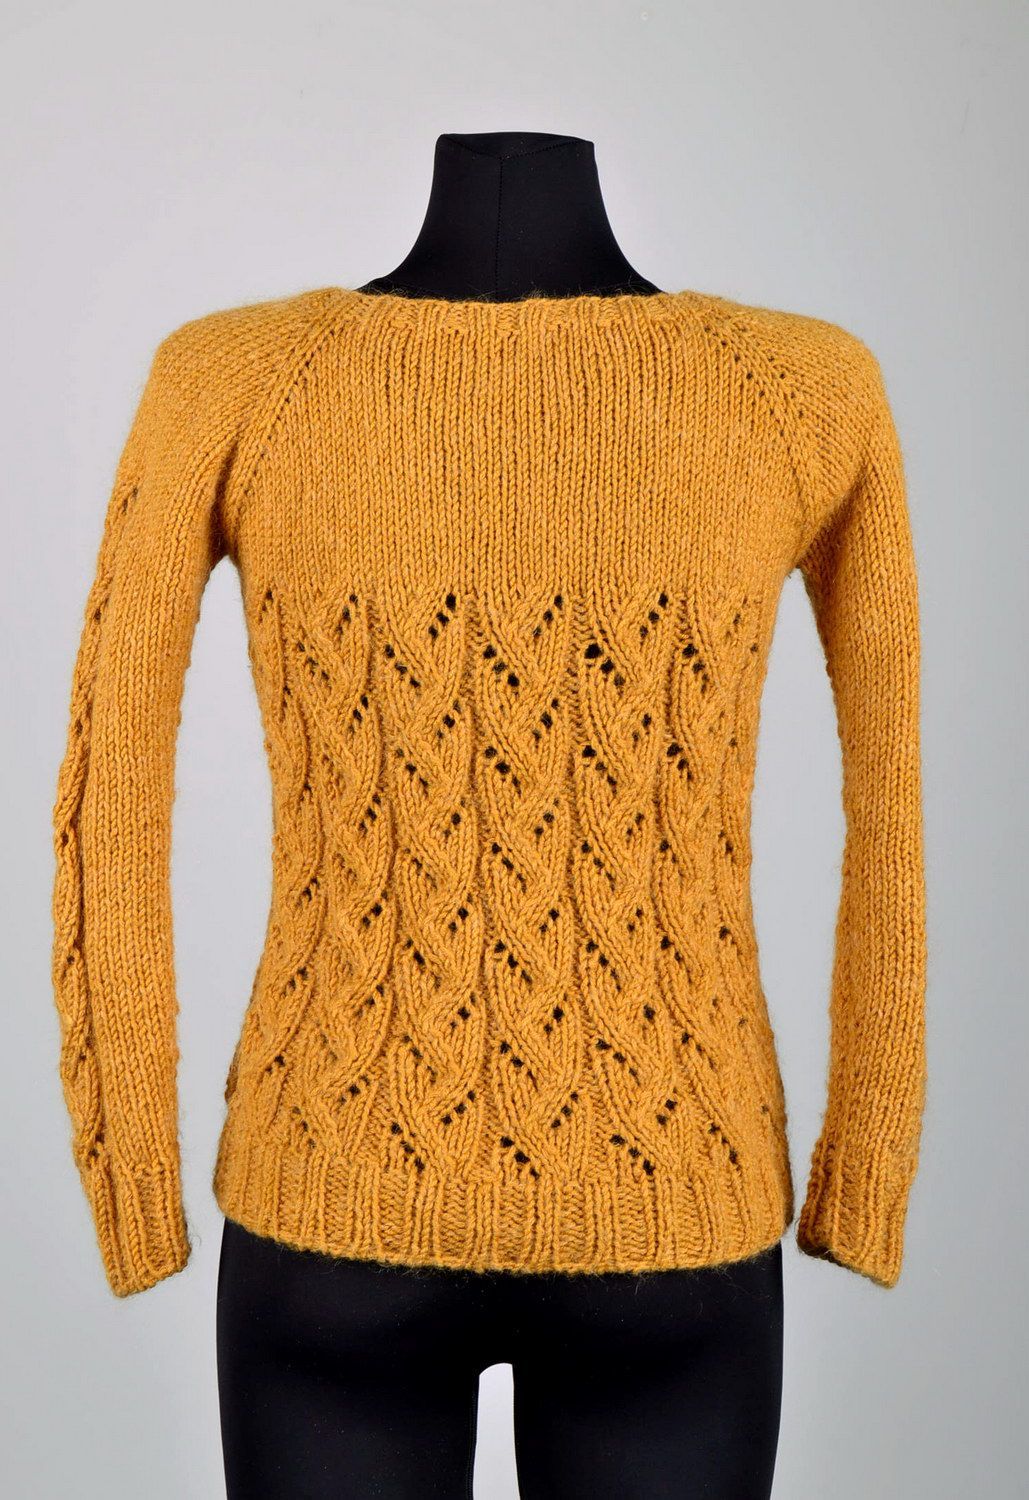 Kniited sweater of milk chocolate color photo 5